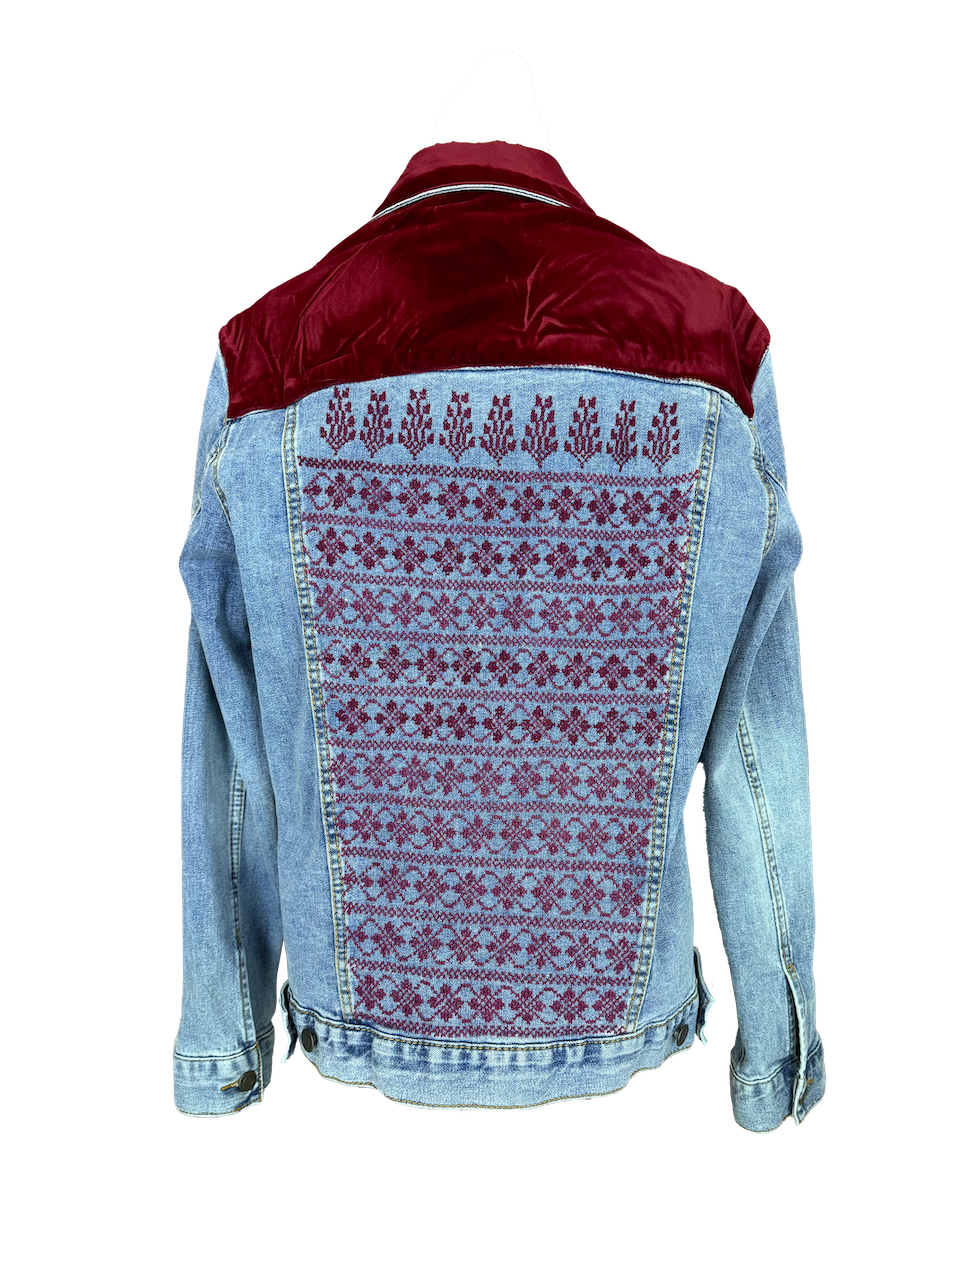 The Heavily Embroidered Denim Jacket in Burgundy With Red Velvet